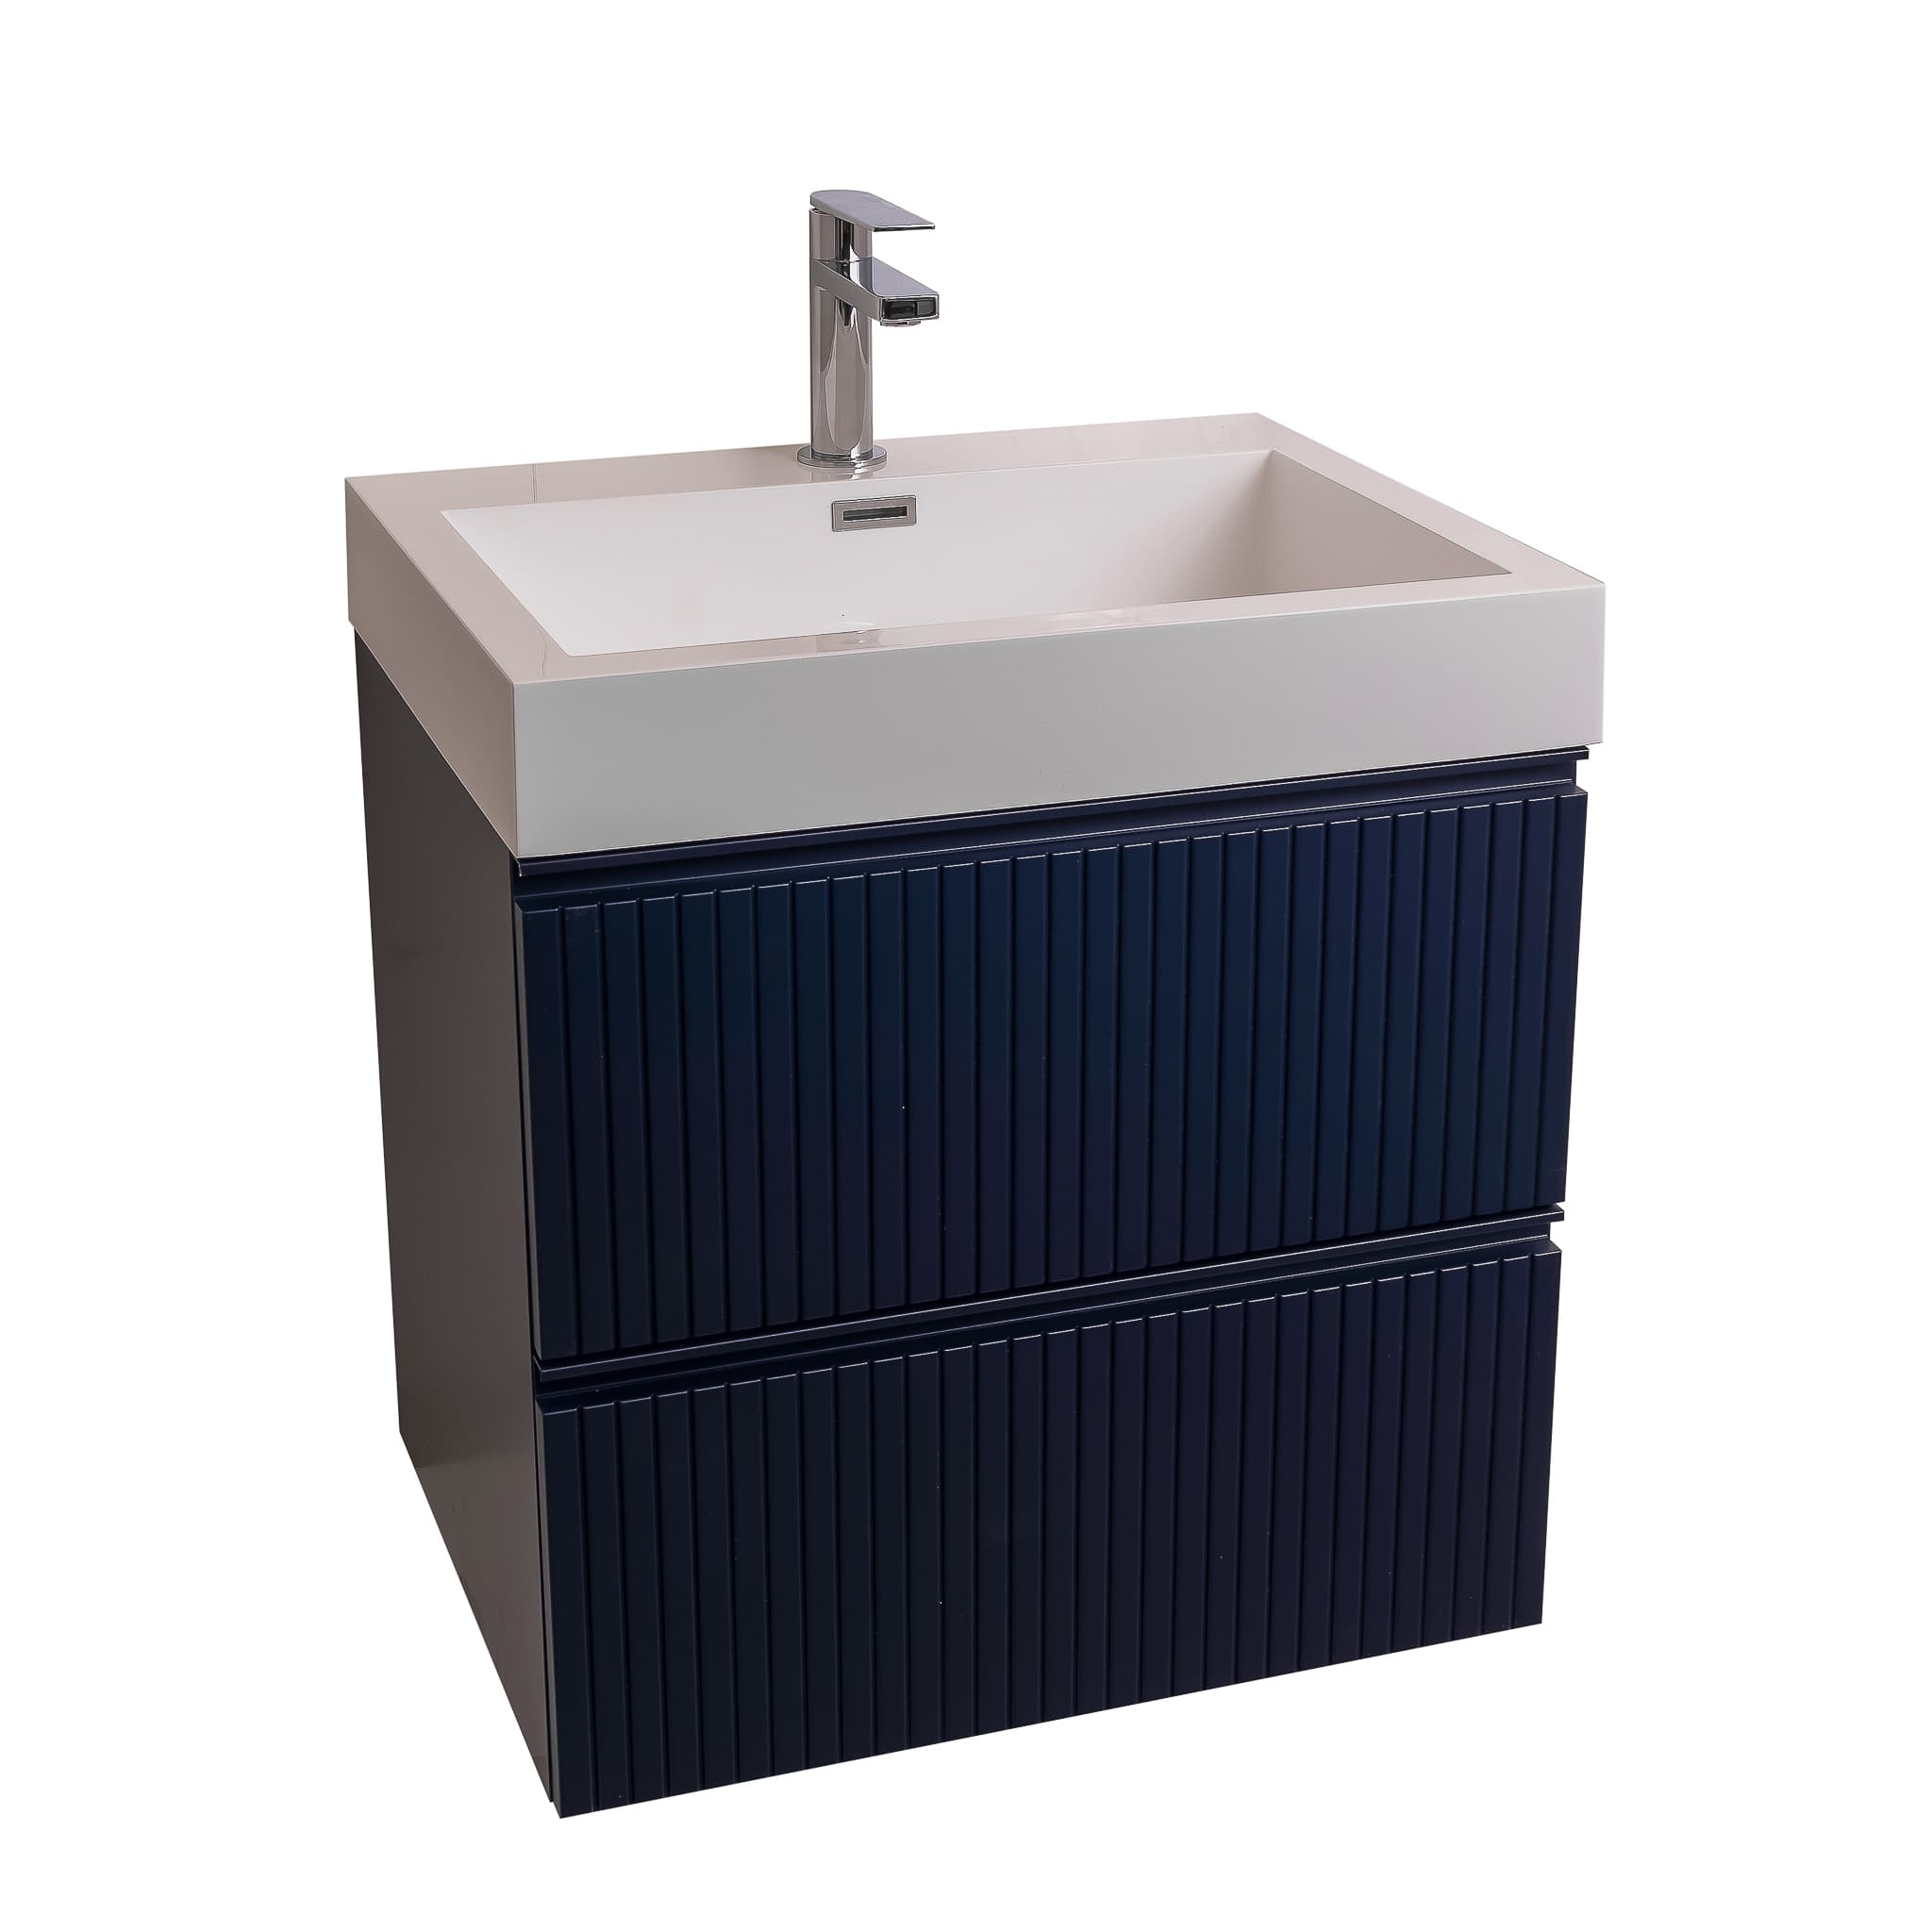 Ares 23.5 Matte Navy Blue Cabinet, Square Cultured Marble Sink, Wall Mounted Modern Vanity Set